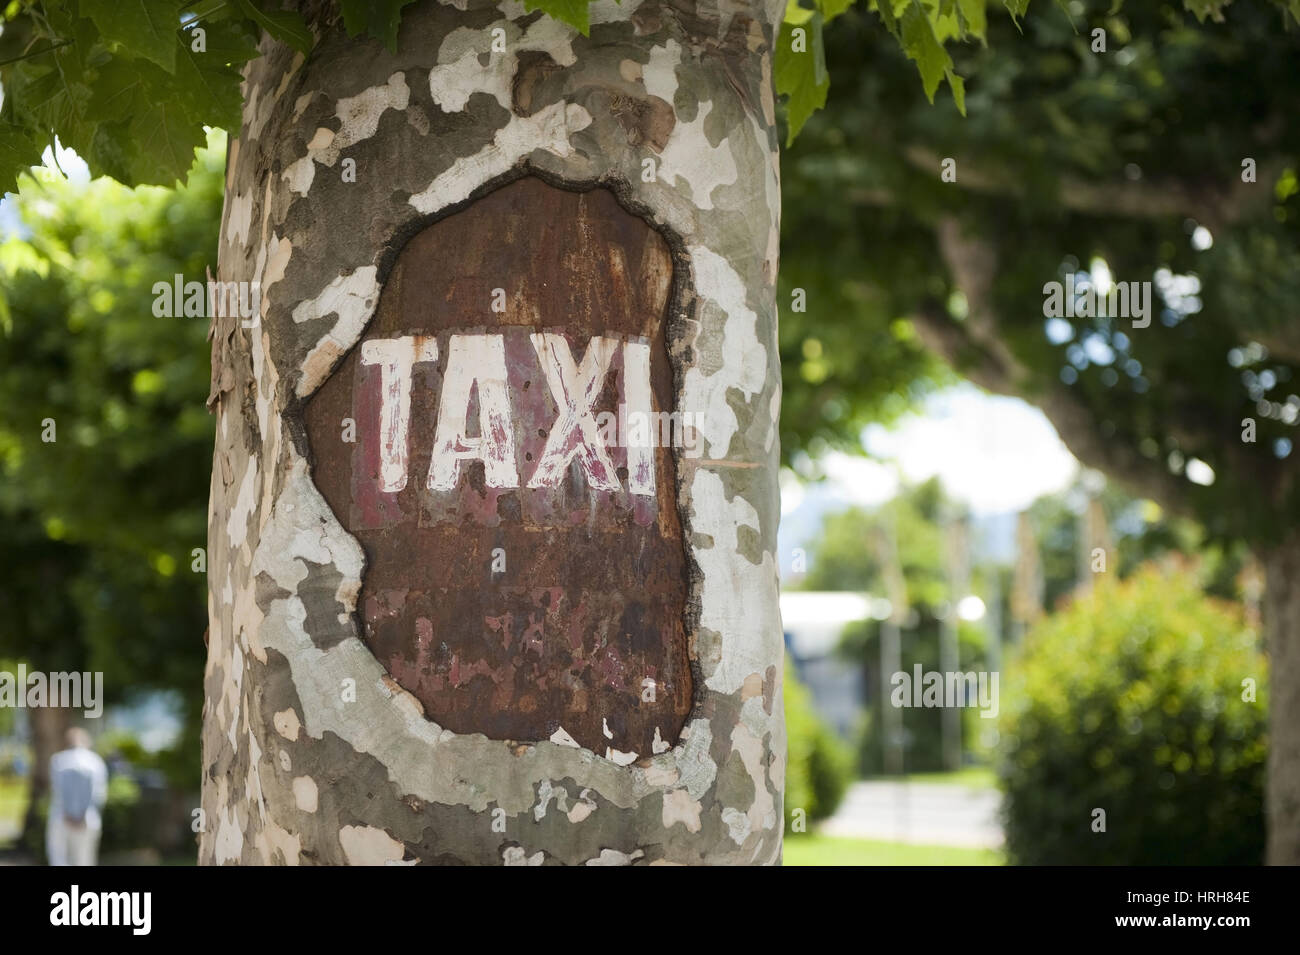 TAXI, eingraviert in Baumstamm - taxi, engraved on a trunk Stock Photo